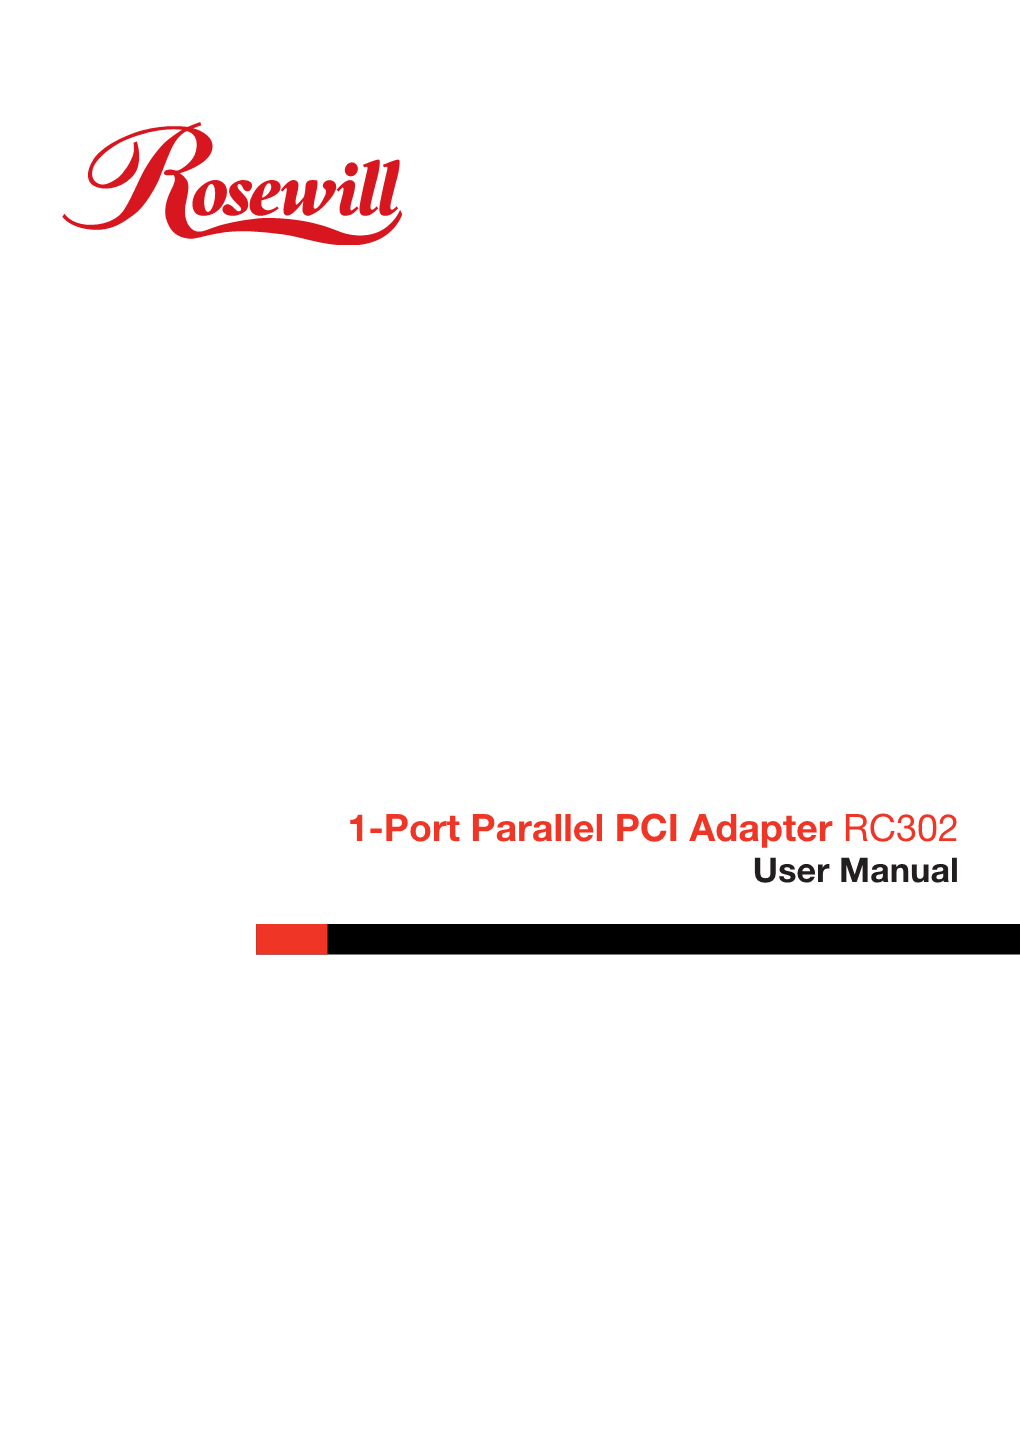 1-Port Parallel PCI Adapter RC302 User Manual 1-Port Parallel PCI Adapter RC302 User Manual